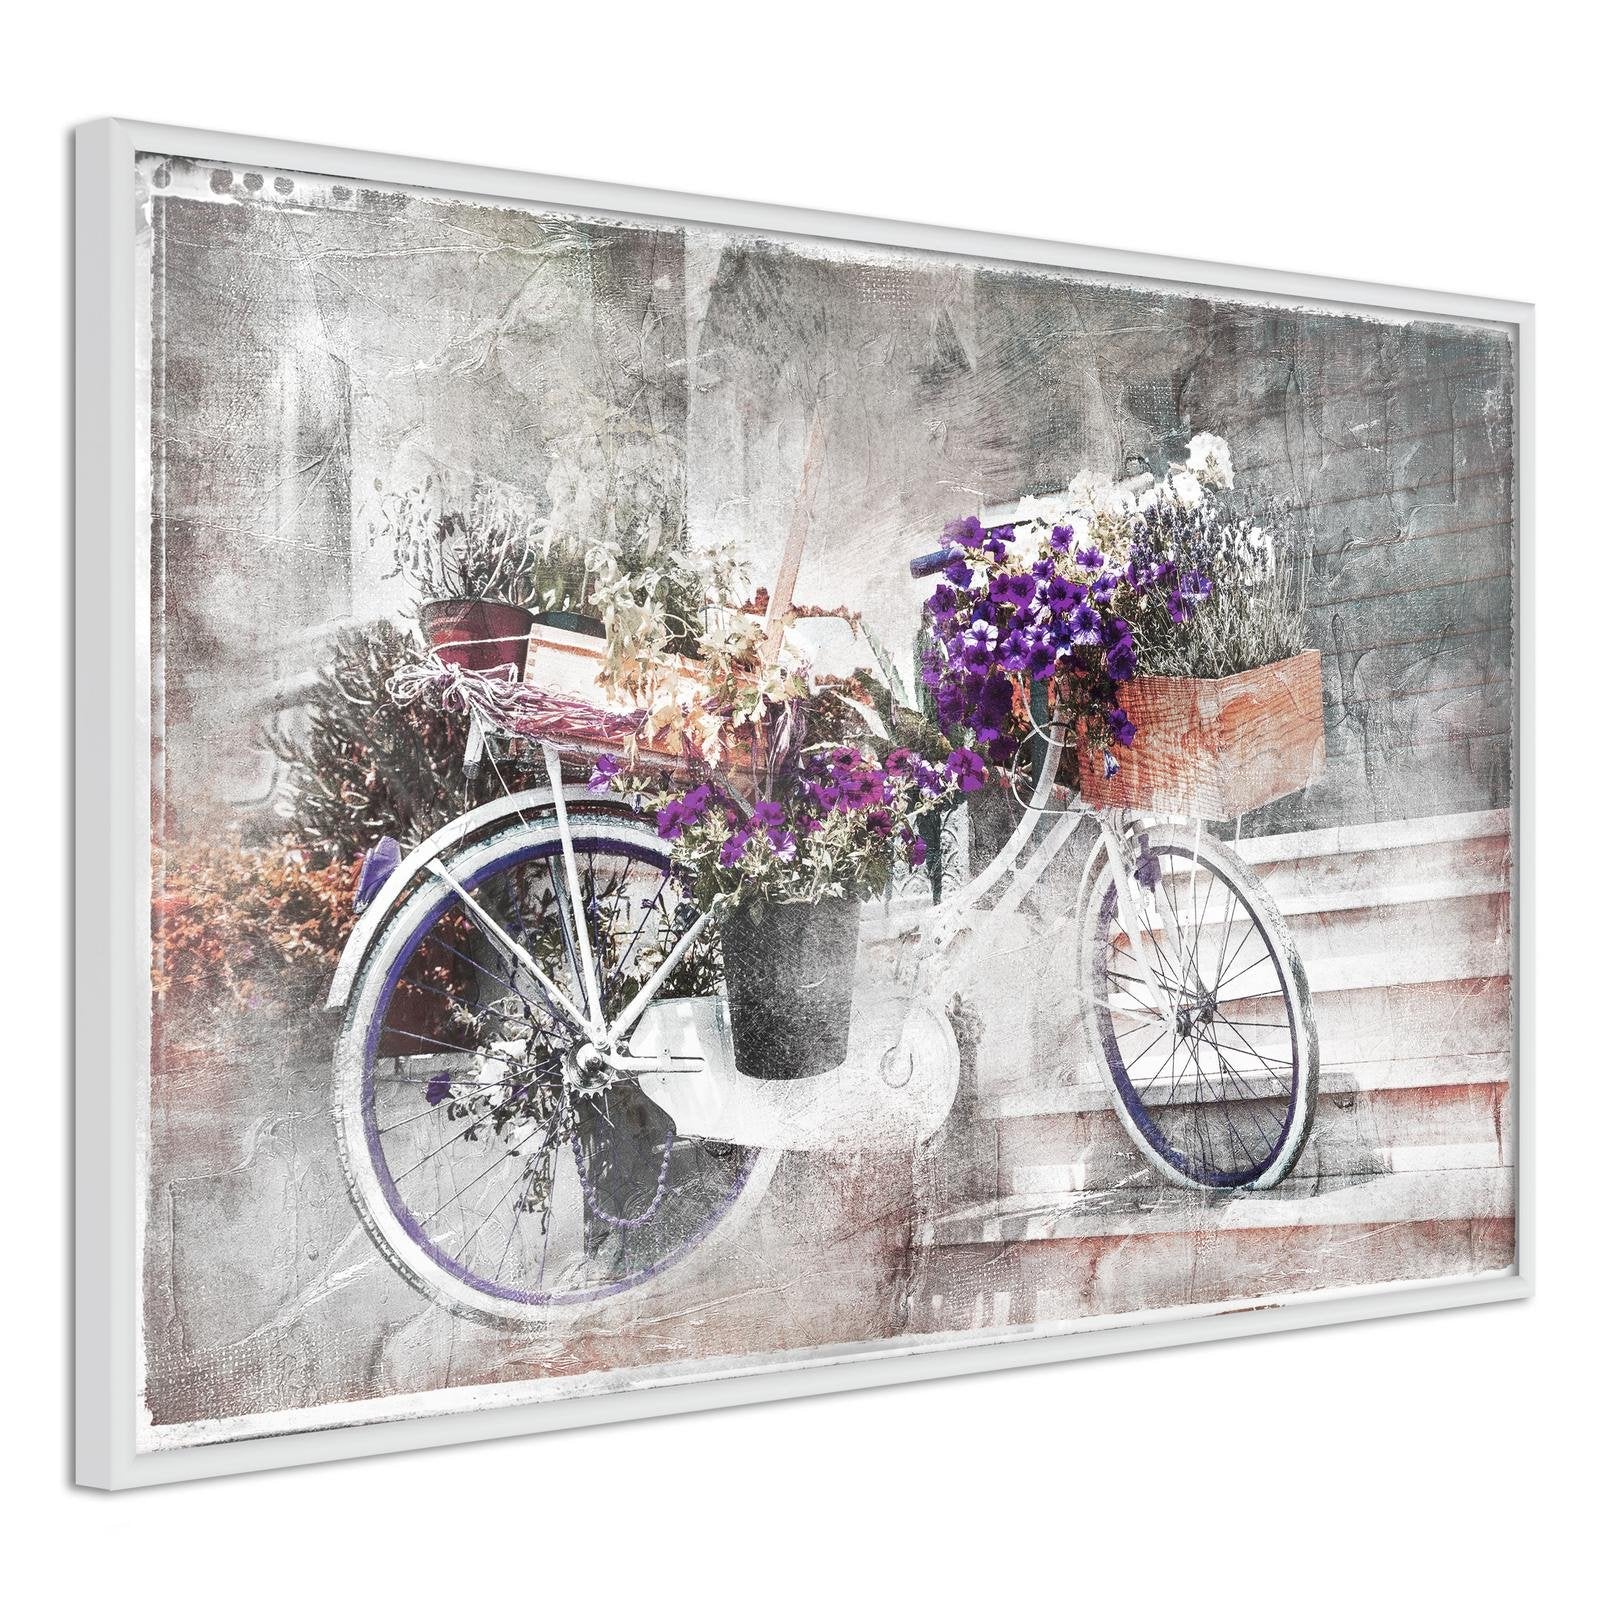 Inramad Poster / Tavla - Flower Delivery-Poster Inramad-Artgeist-peaceofhome.se